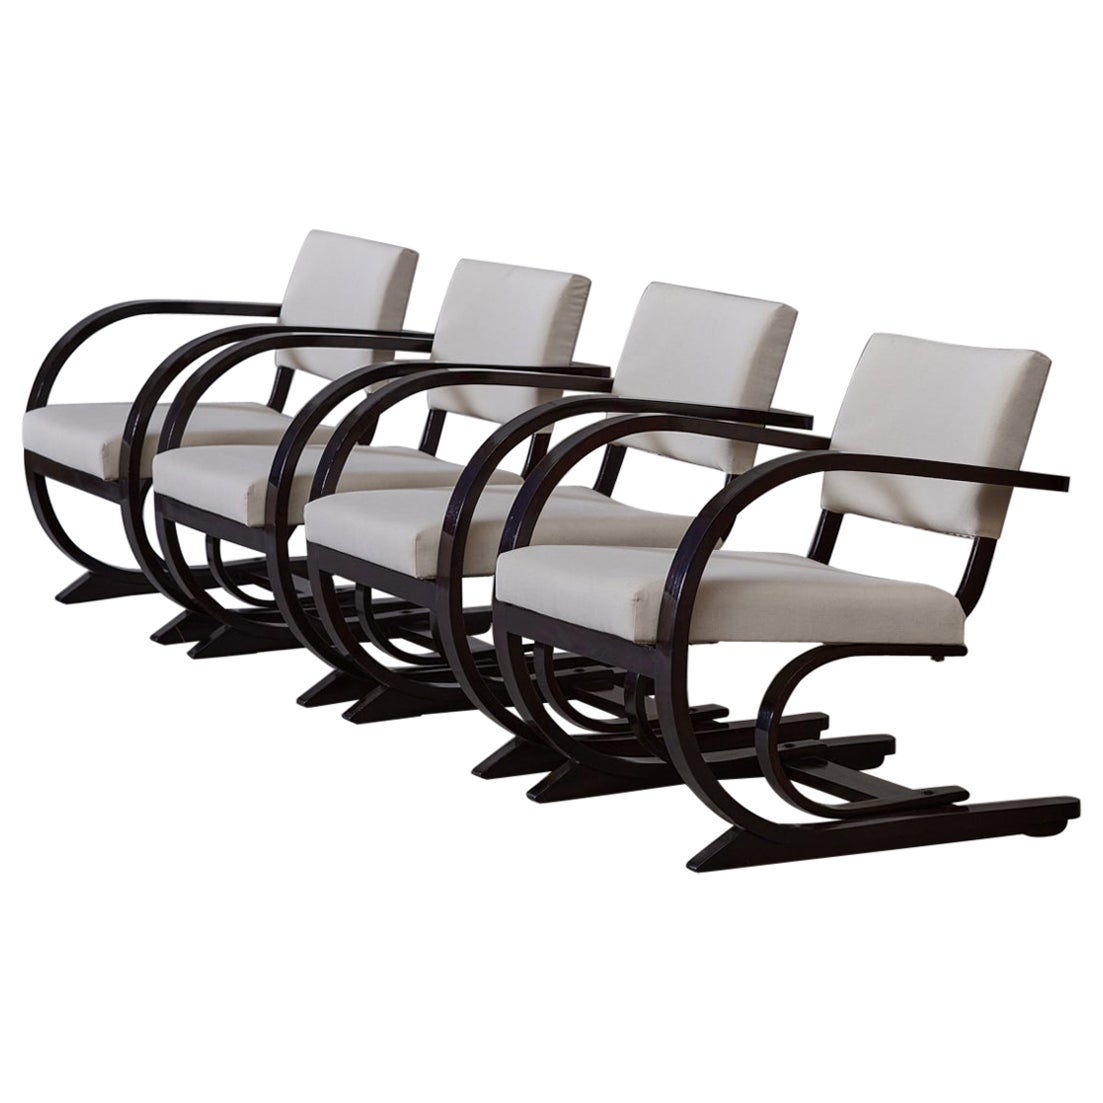 Set of Four Art Deco Bentwood Lounge Chairs by Bas Van Pelt Netherlands